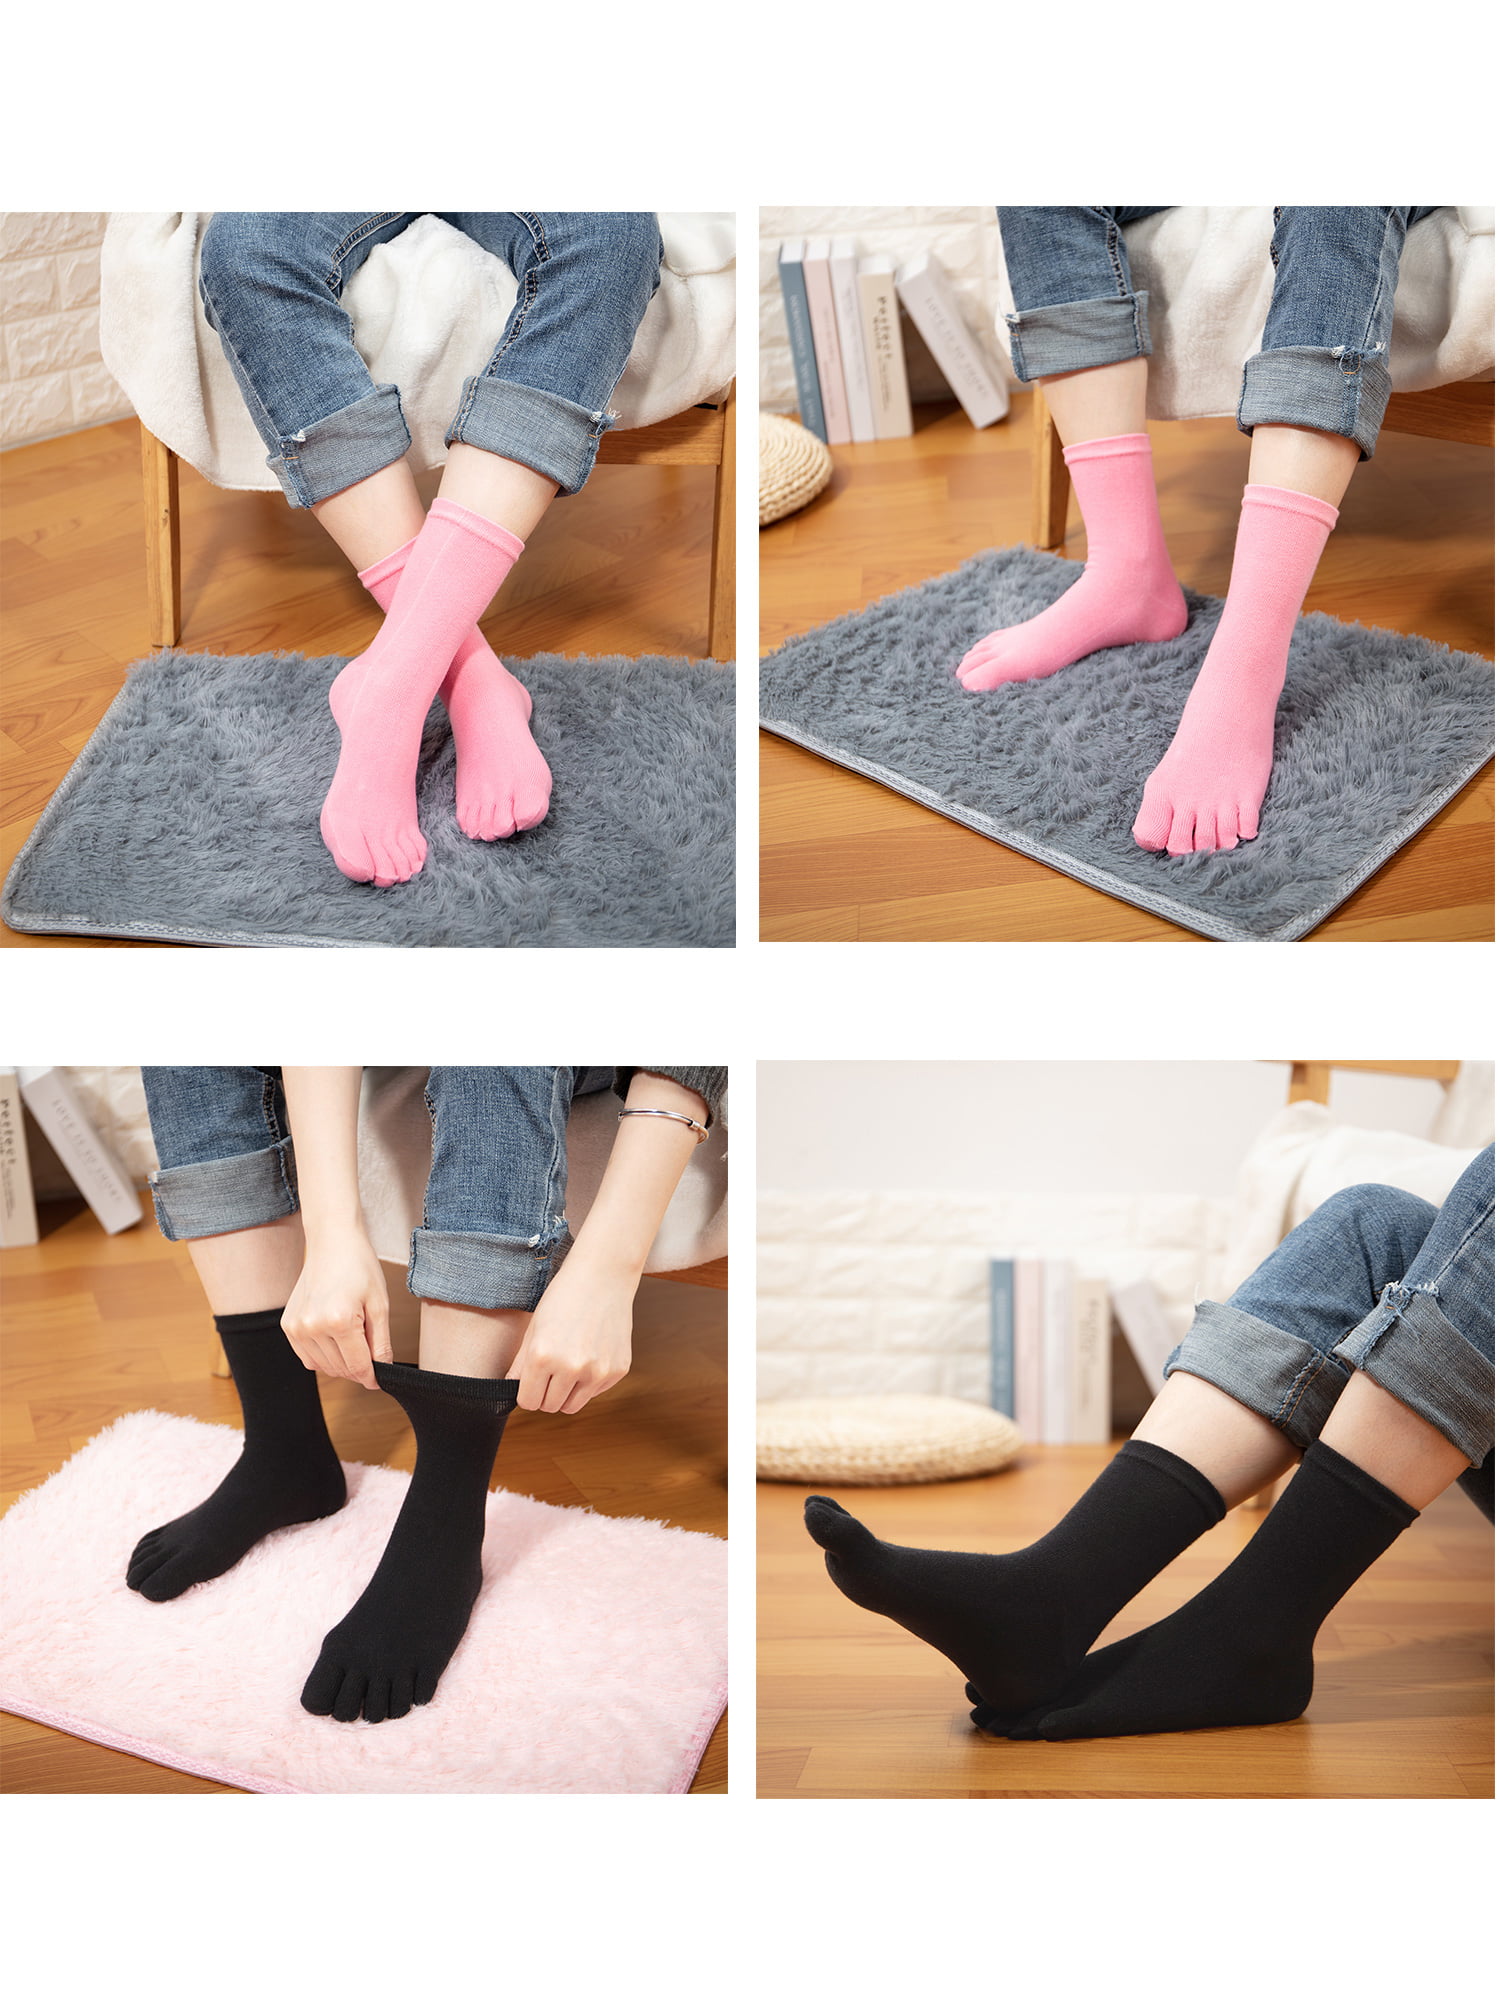 PACKGOUT 6 Pairs No show Toe Socks Breathable Five Finger Running Socks BK/GY